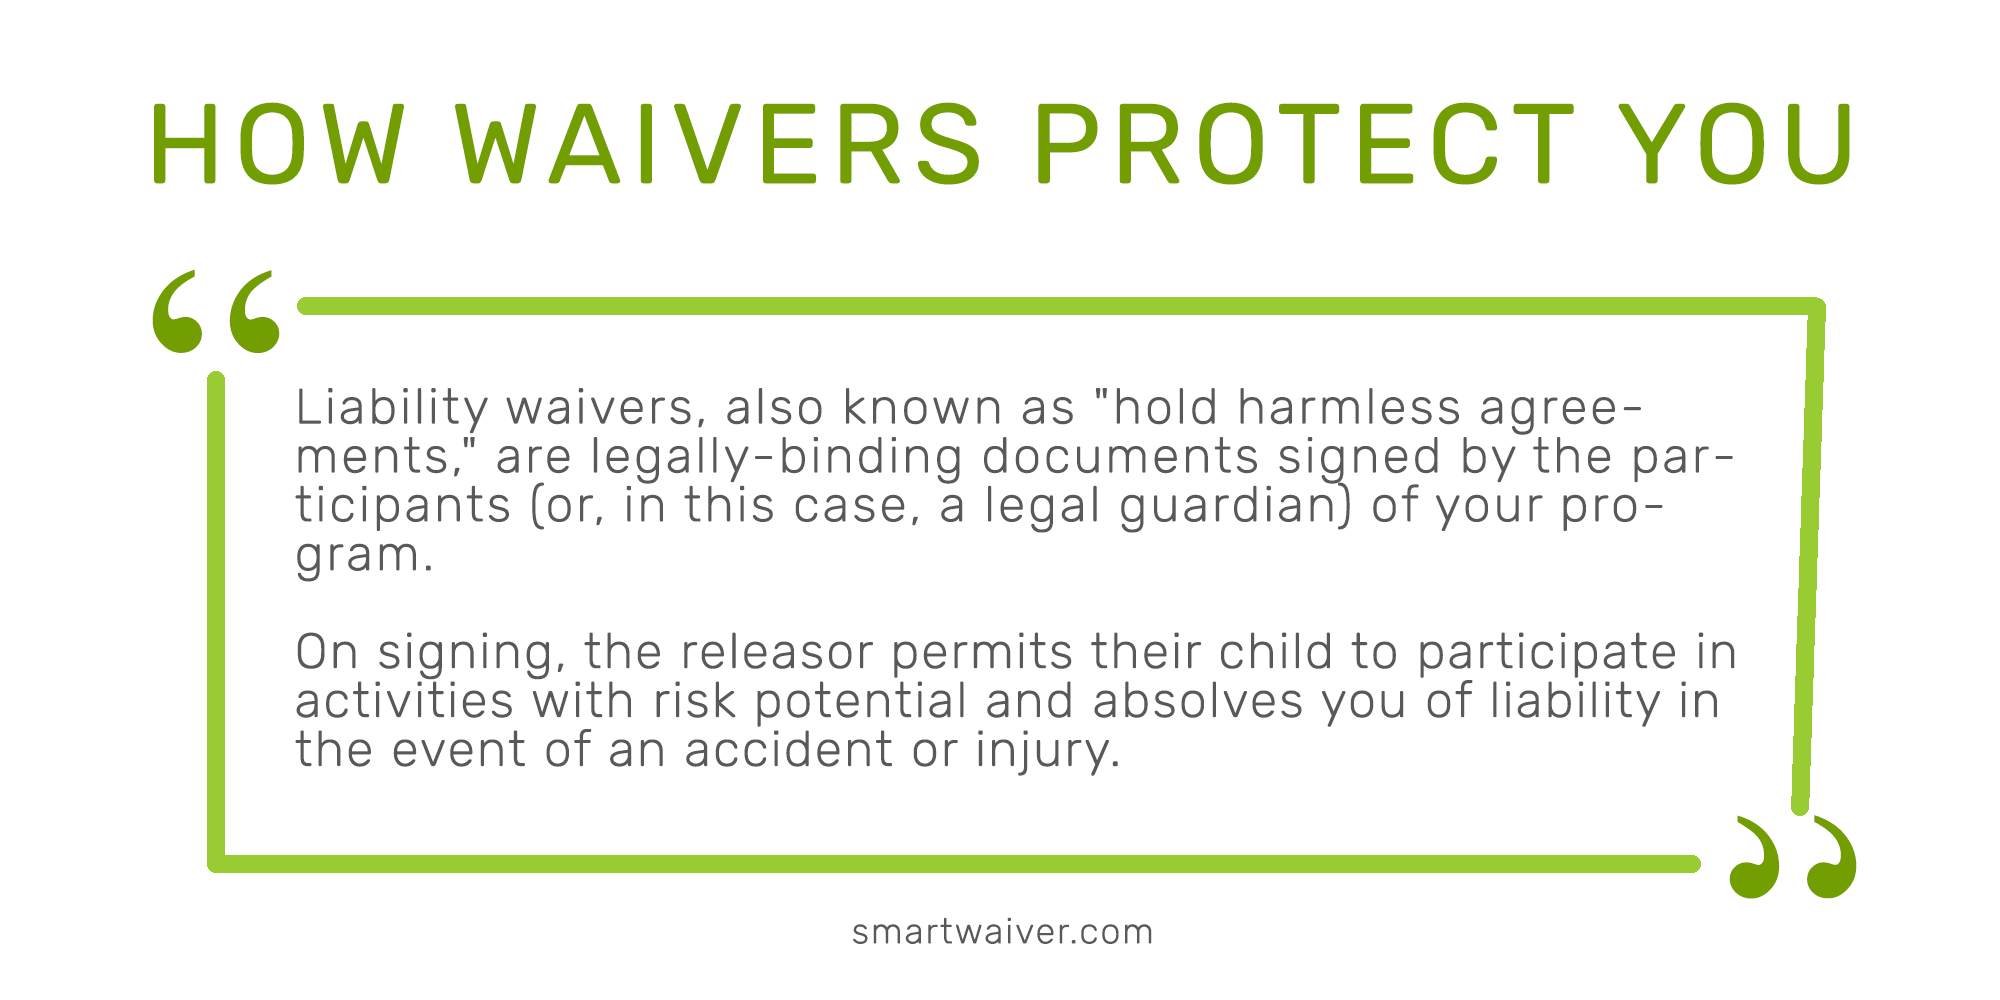 Definition of waivers (explained in the text below).